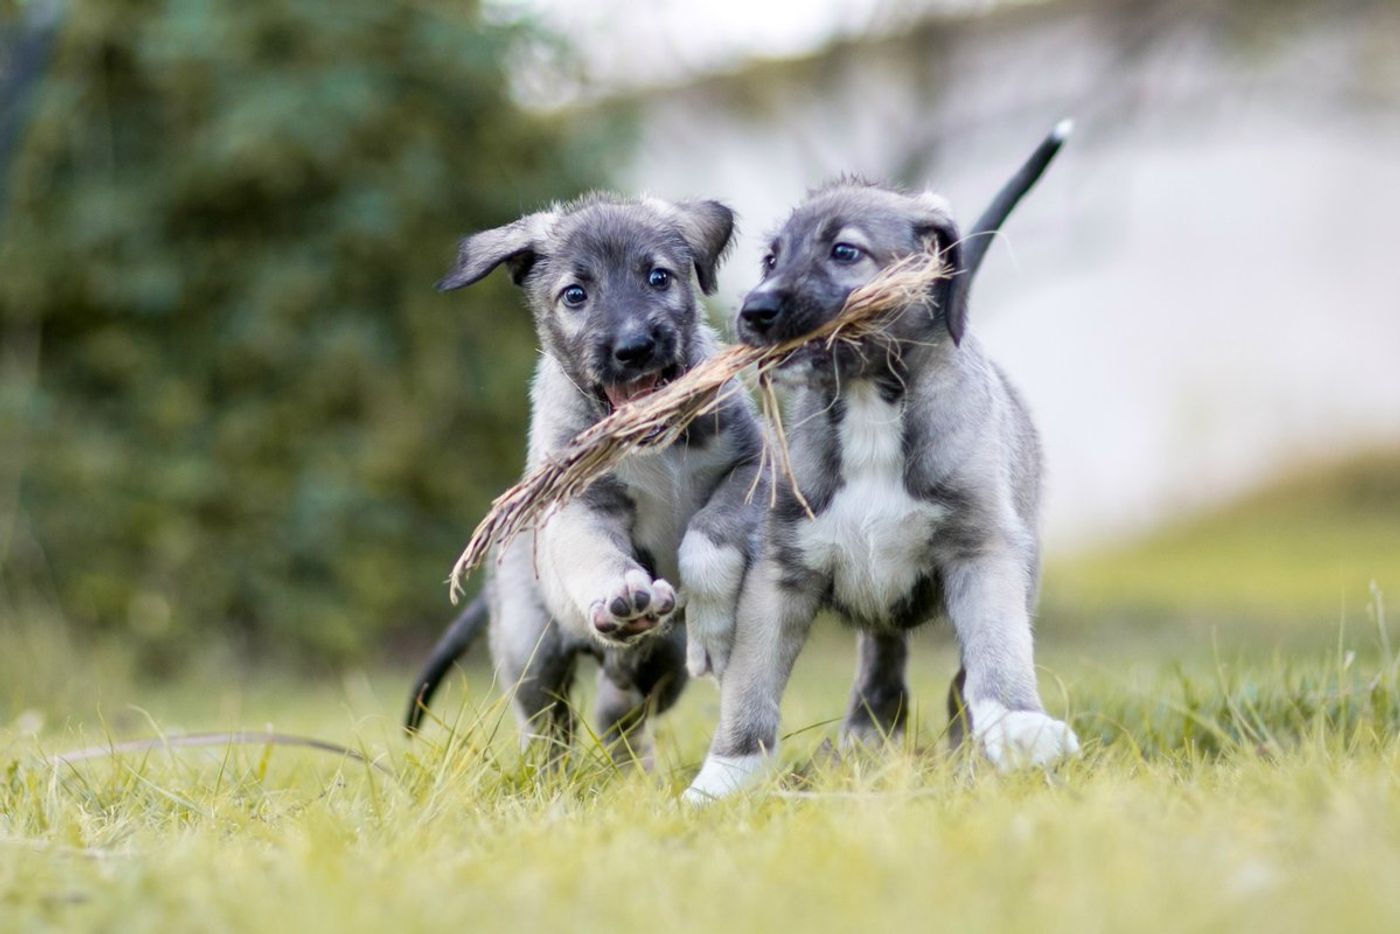 The two identical twin puppies run while playing with a stick.